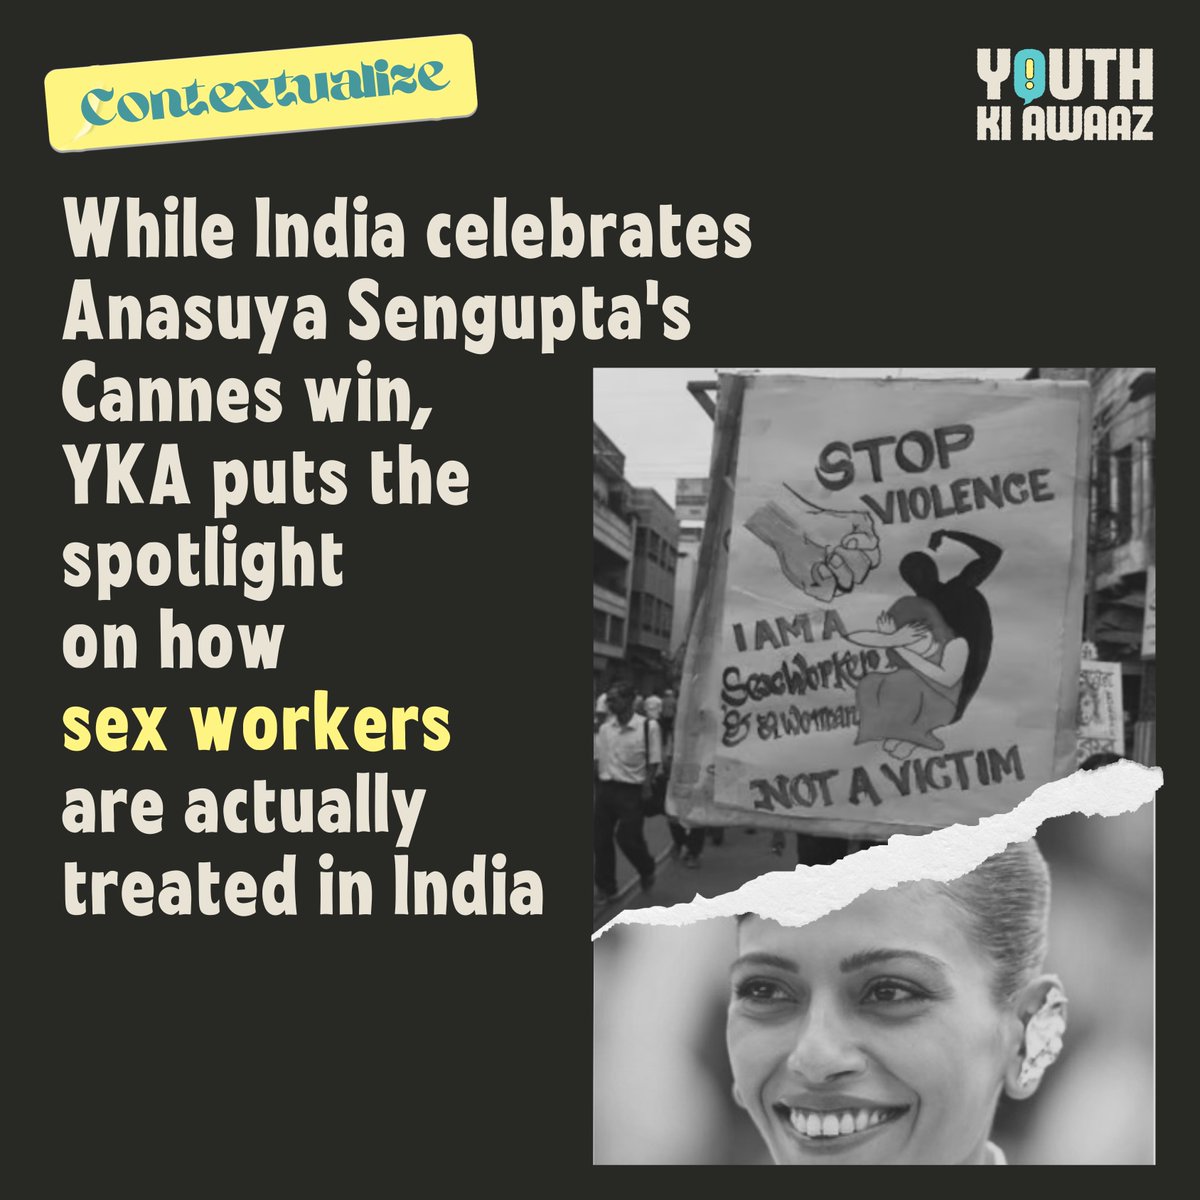 Anasuya Sengupta recently won the Best Actress Award at the Cannes Film Festival for playing the role of a sex worker in the film ‘The Shameless.’

While everyone applauds the film, it’s important to remind ourselves about the reality of the lives of sex workers in India. (1/5)